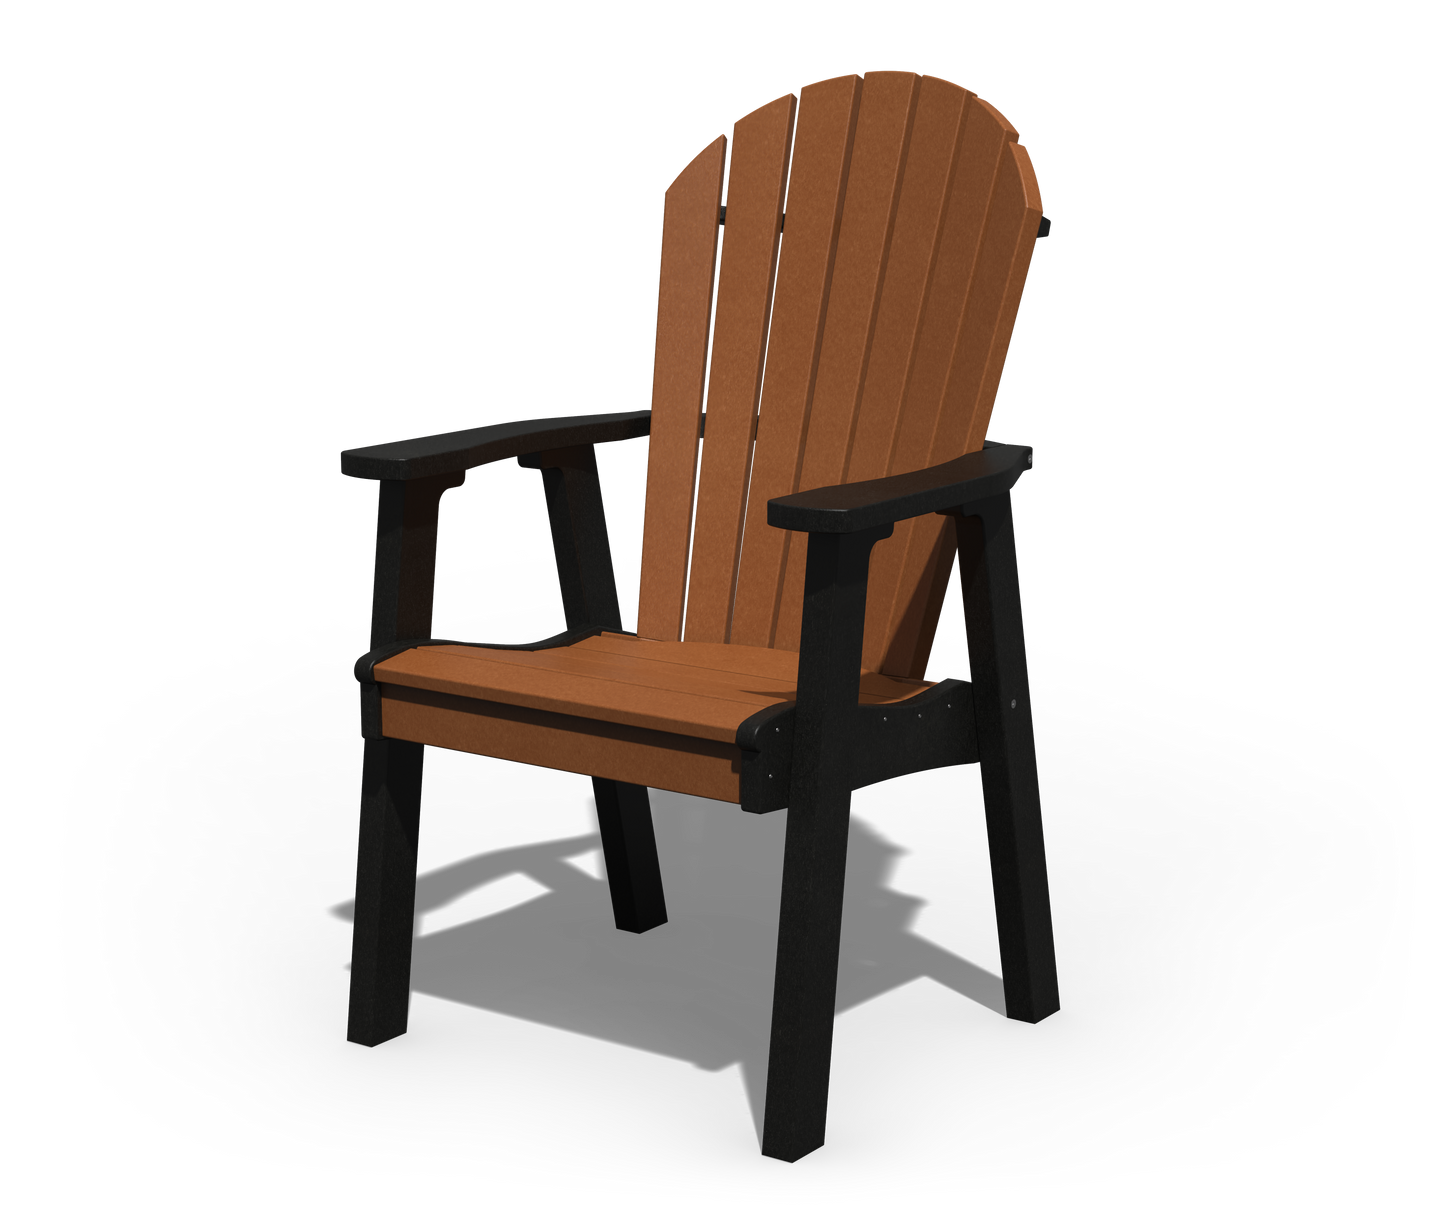 Patiova Recycled Plastic Amish Crafted Adirondack Dining Chair - LEAD TIME TO SHIP 3 WEEKS